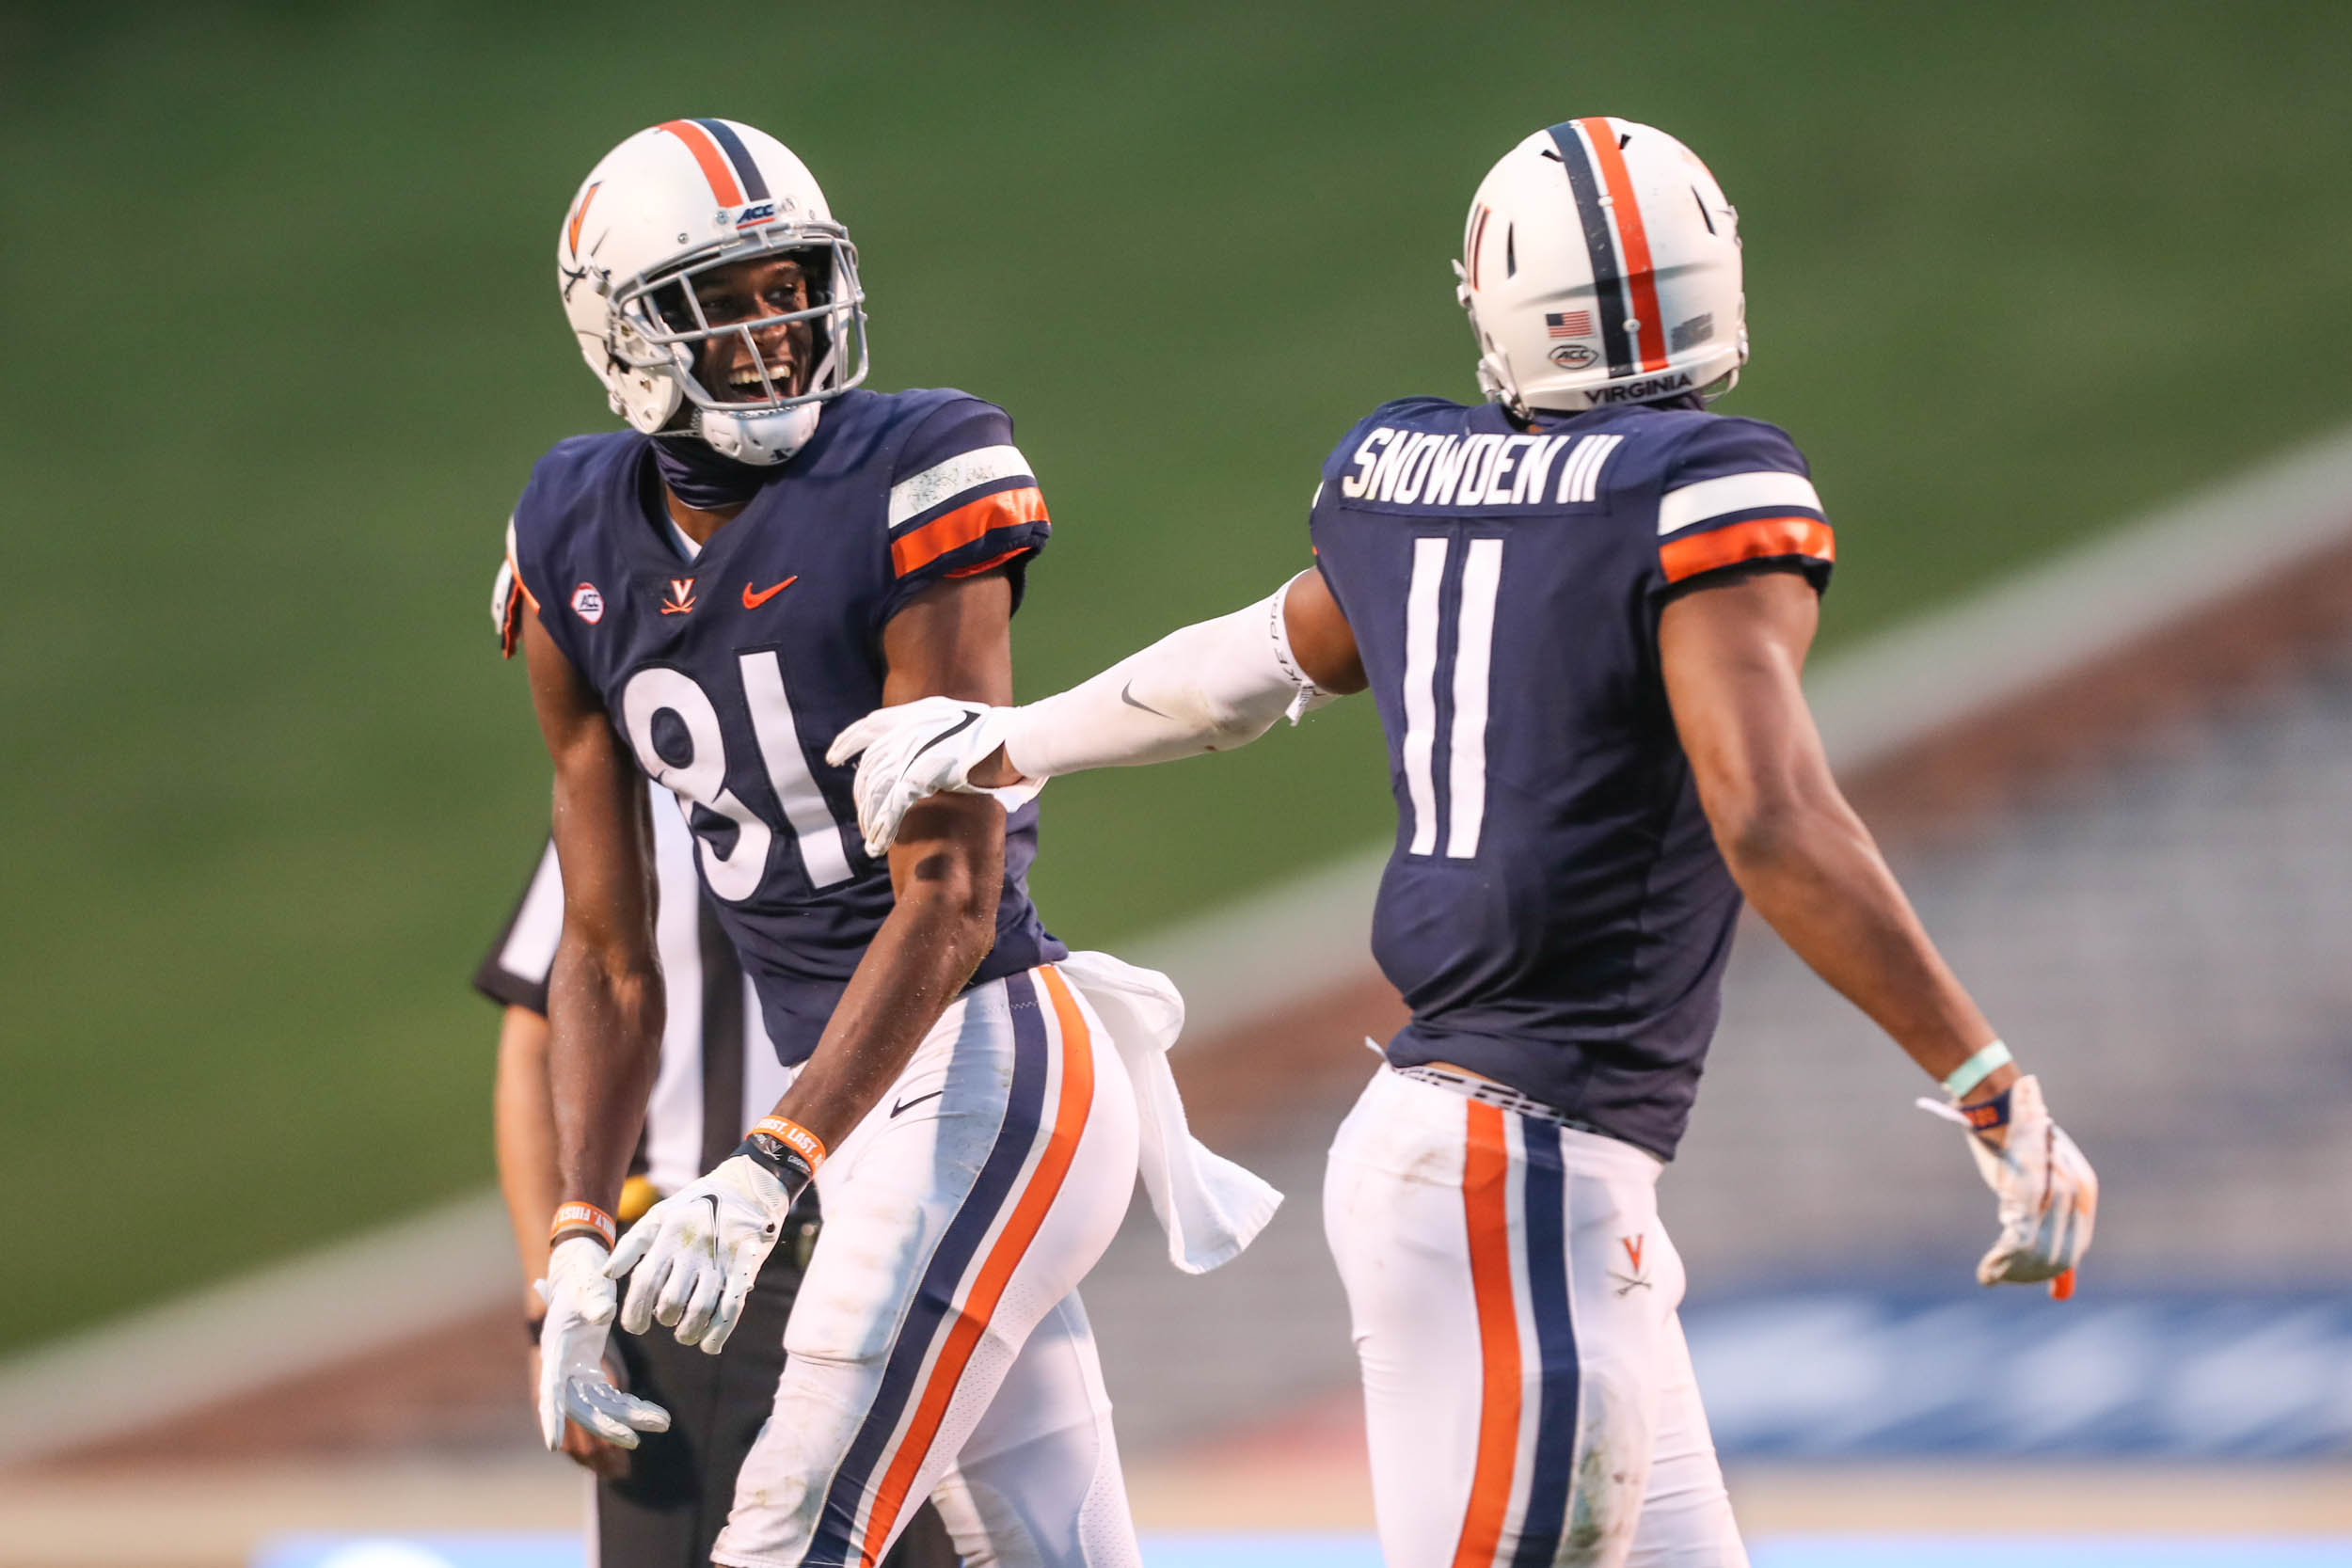 Lavel Davis Jr., left, and  Charles Snowden, right talk on field during a game